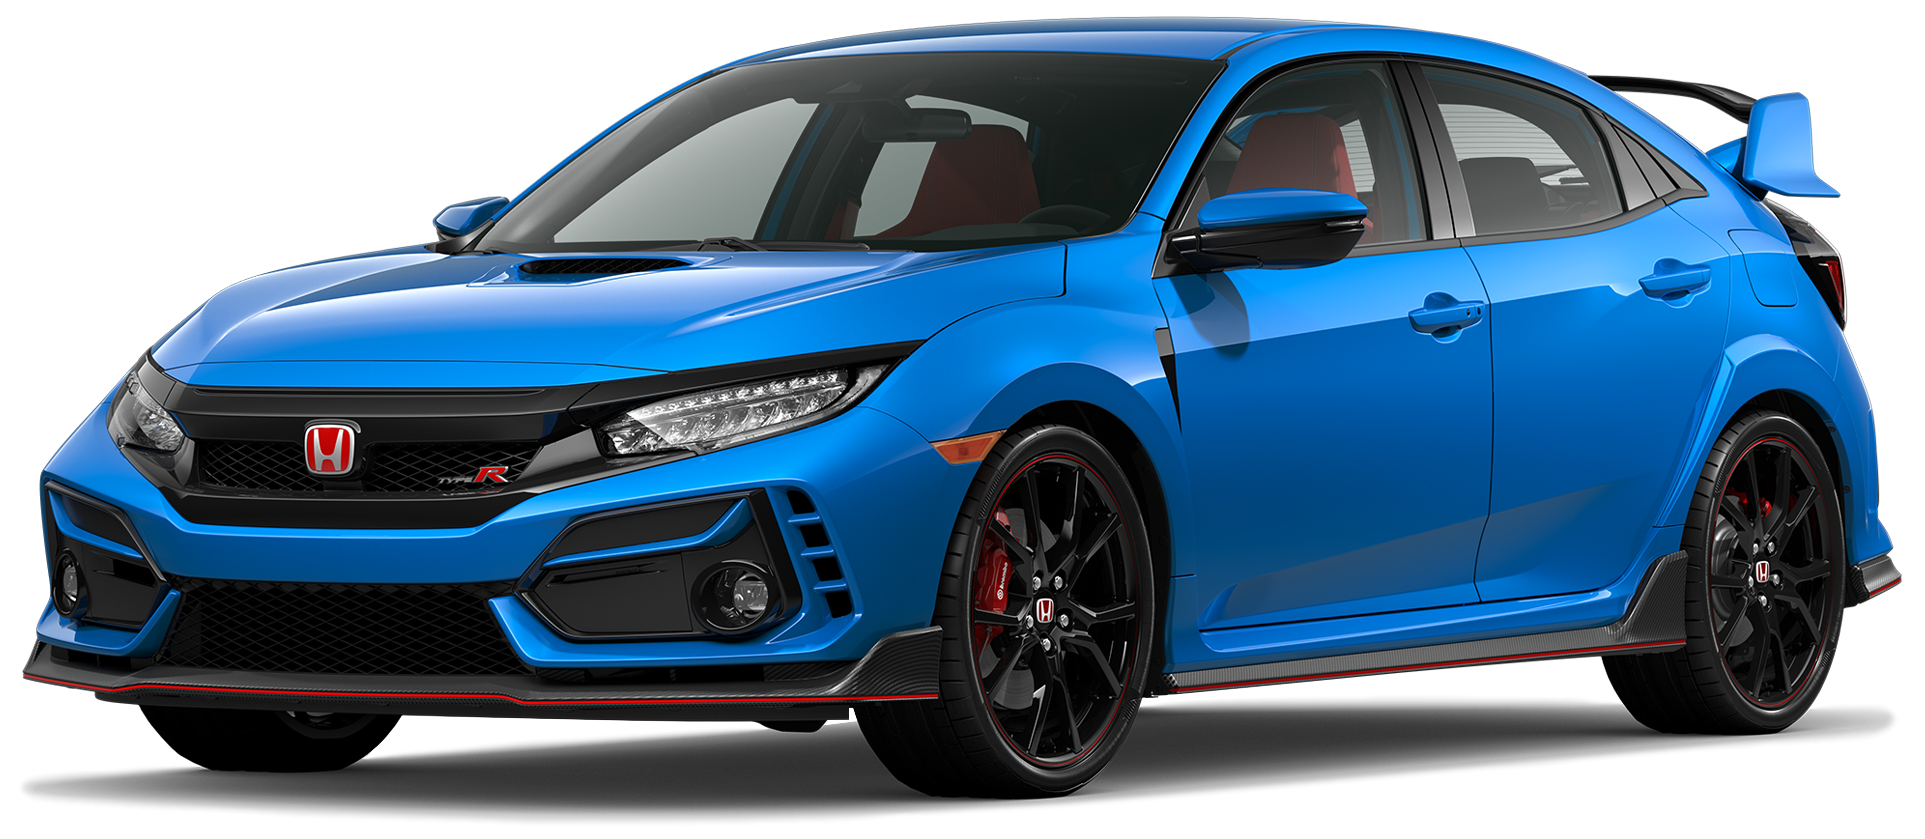 2020-honda-civic-type-r-incentives-specials-offers-in-rock-hill-sc